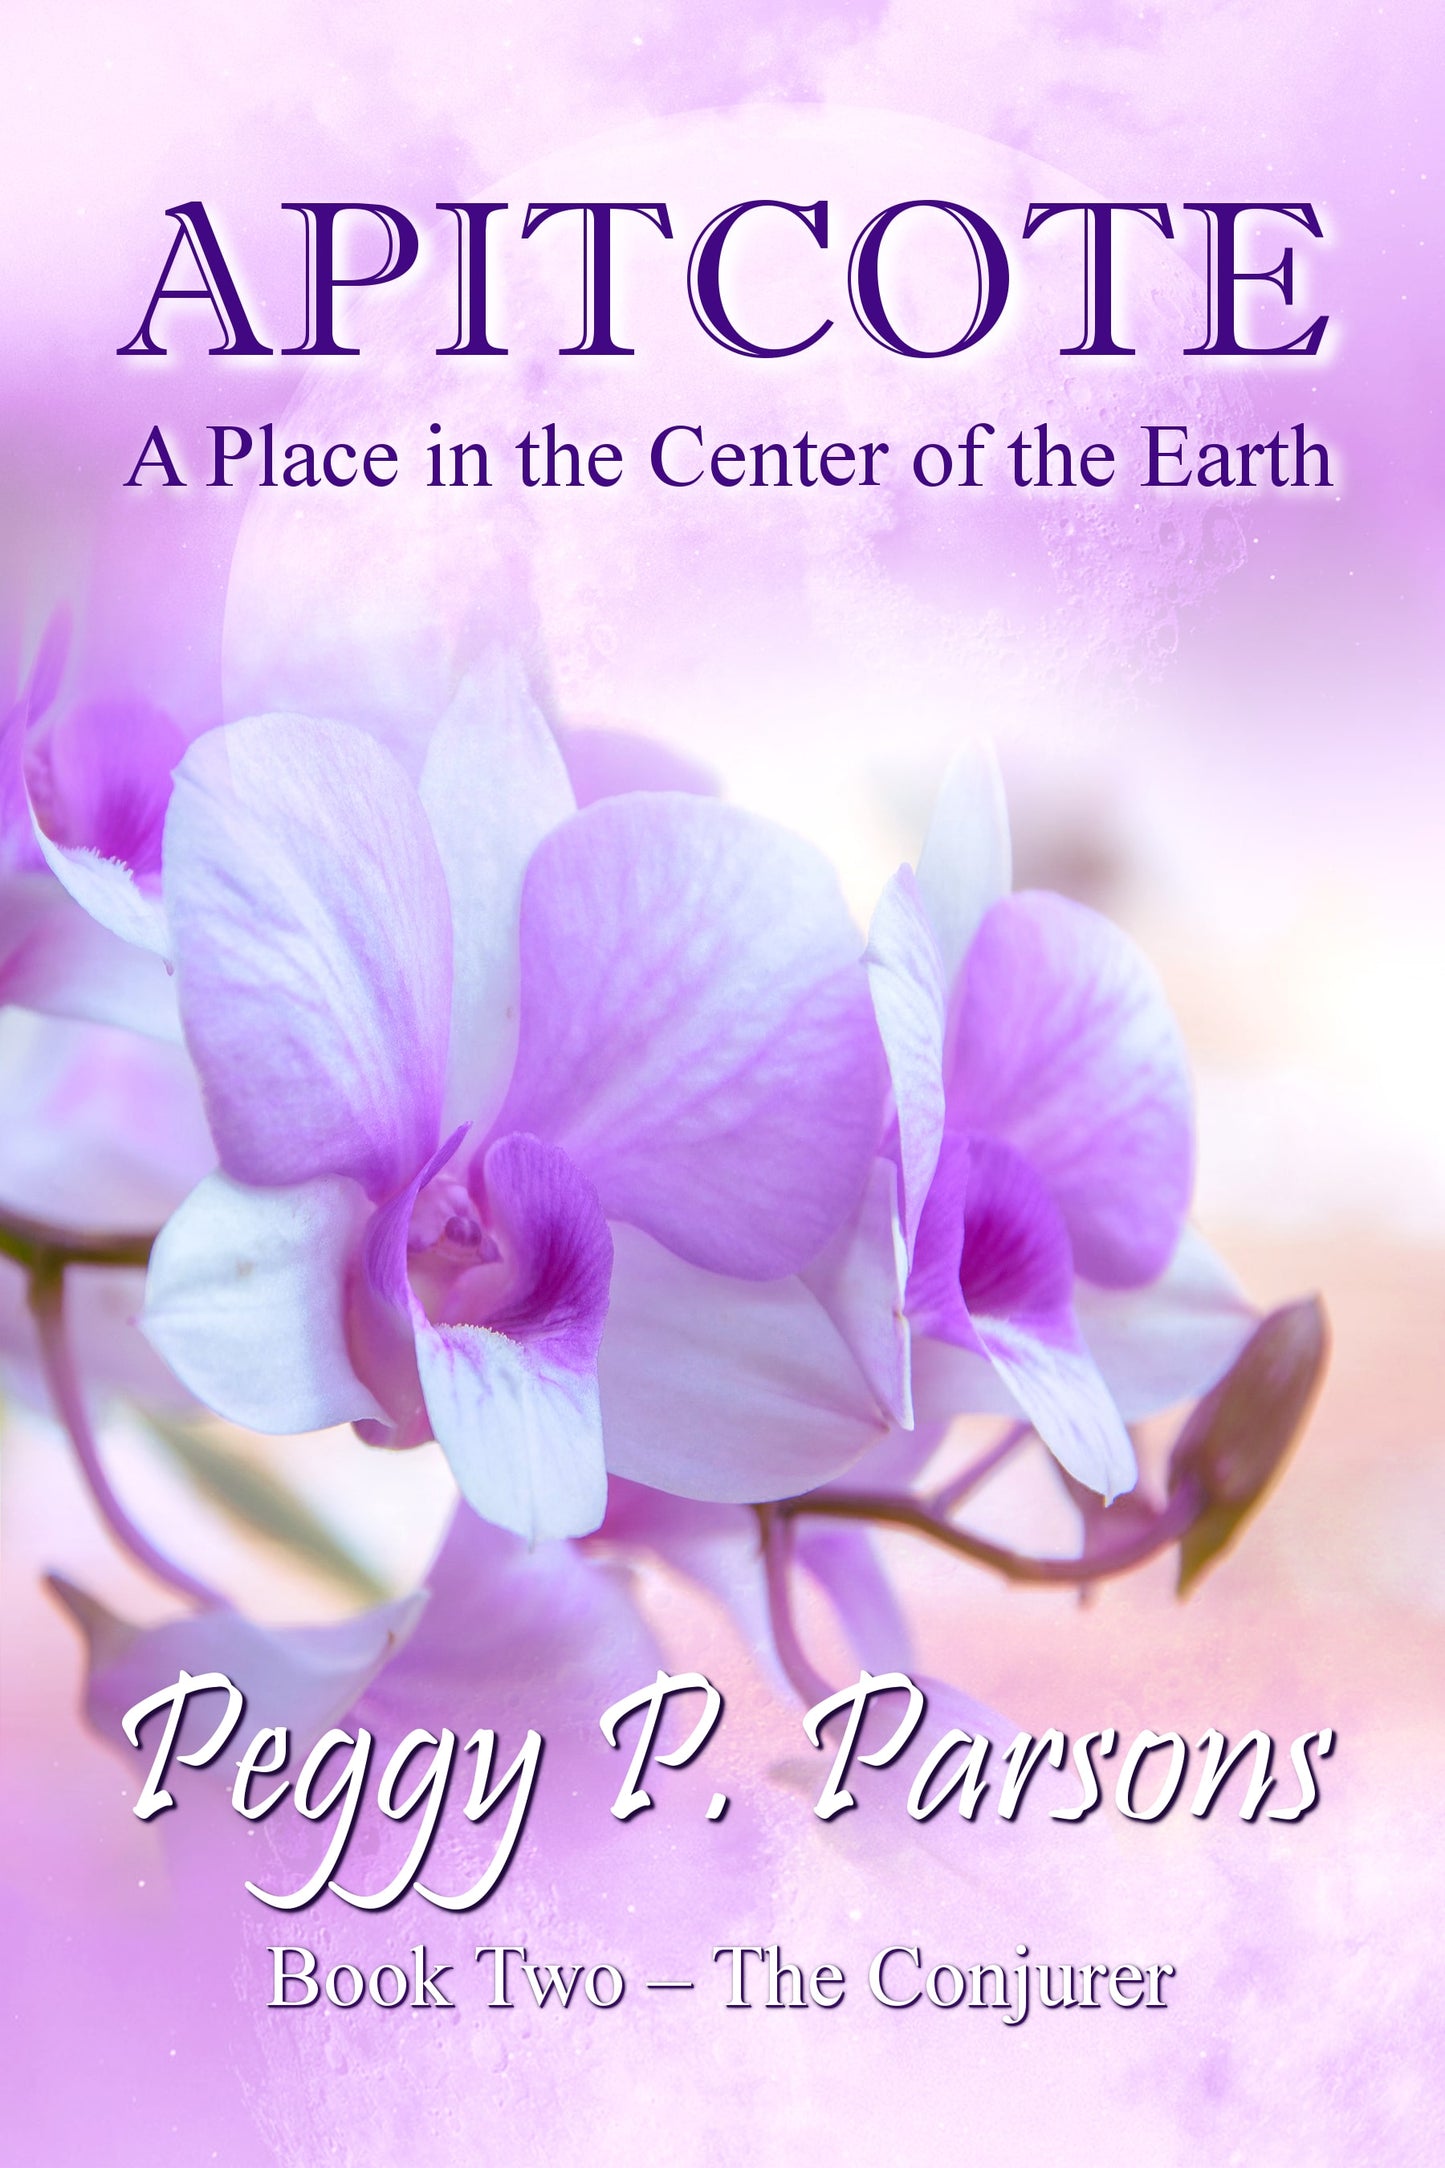 APITCOTE: A Place in the Center of the Earth. Book Two - The Conjurer